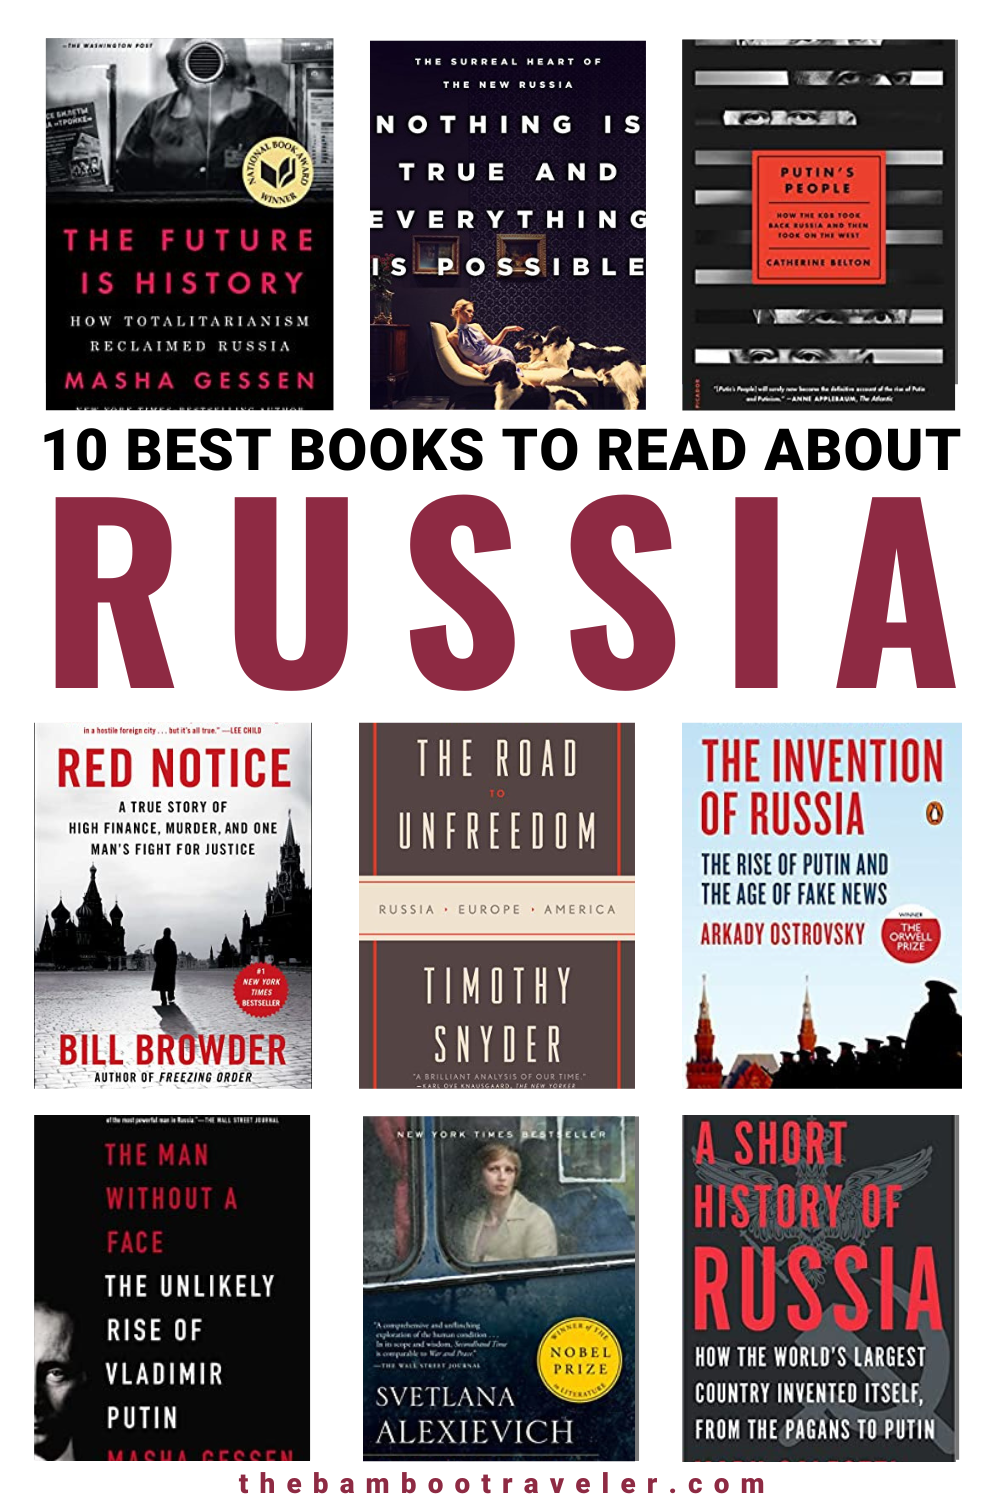 10 best books about Russia